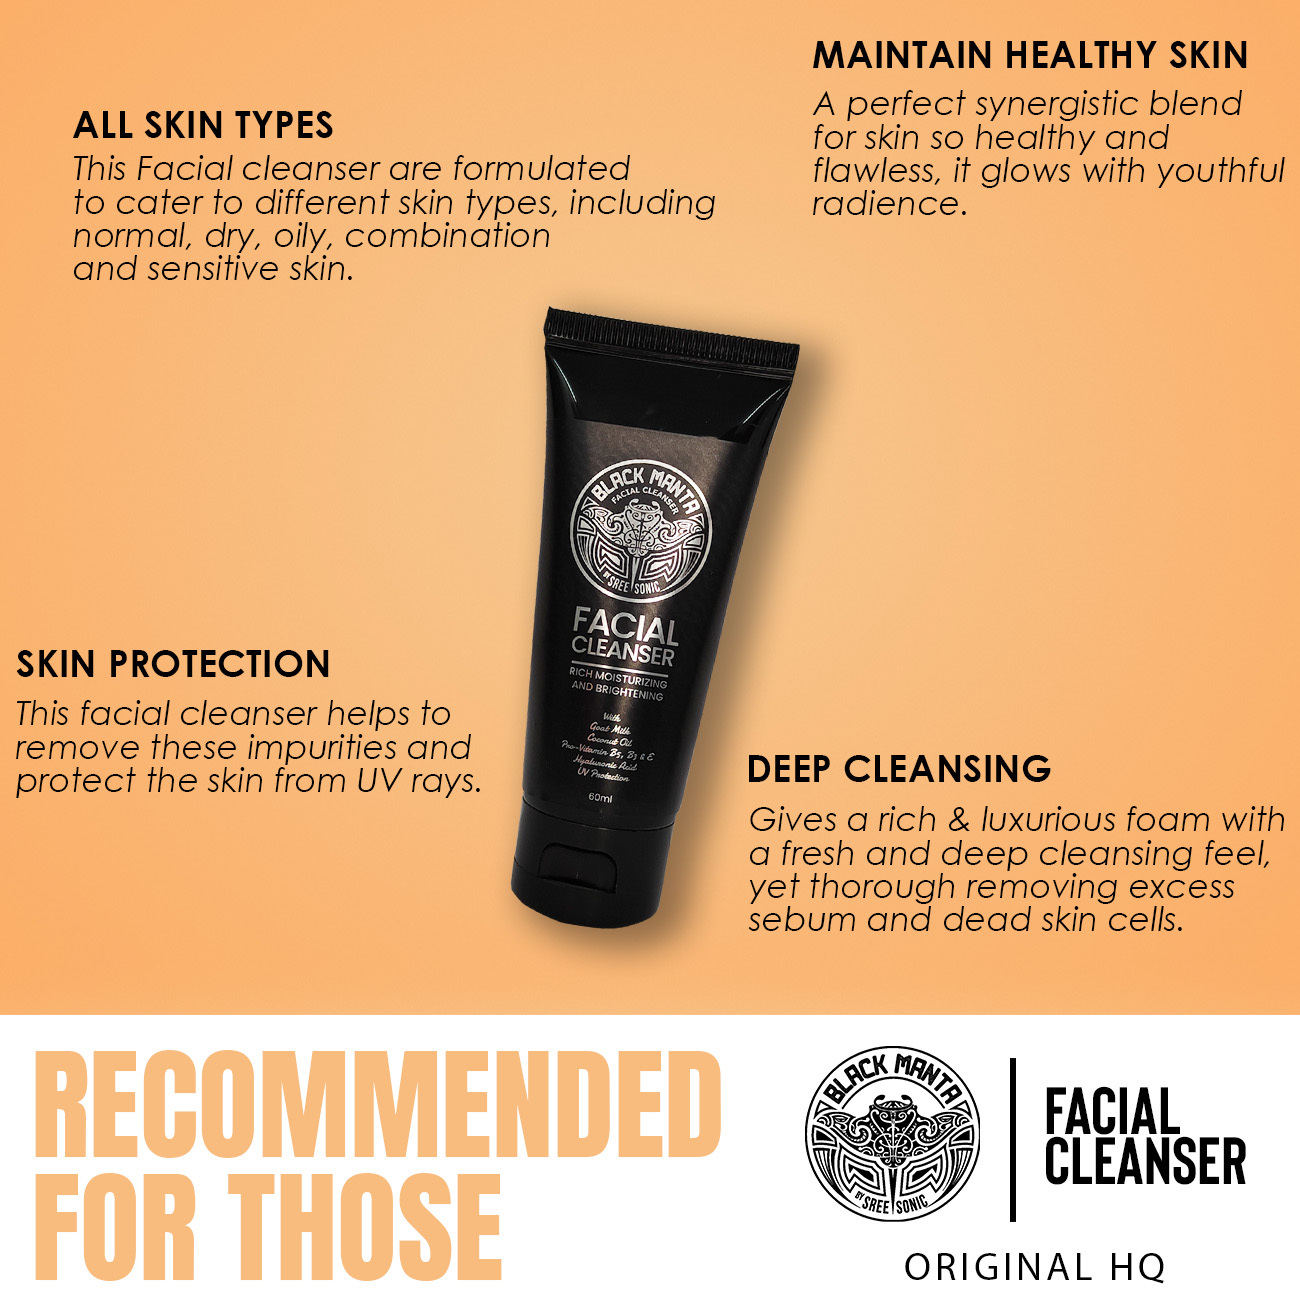 CLEANSER - RECOMMENDED FOR THOSE (1)